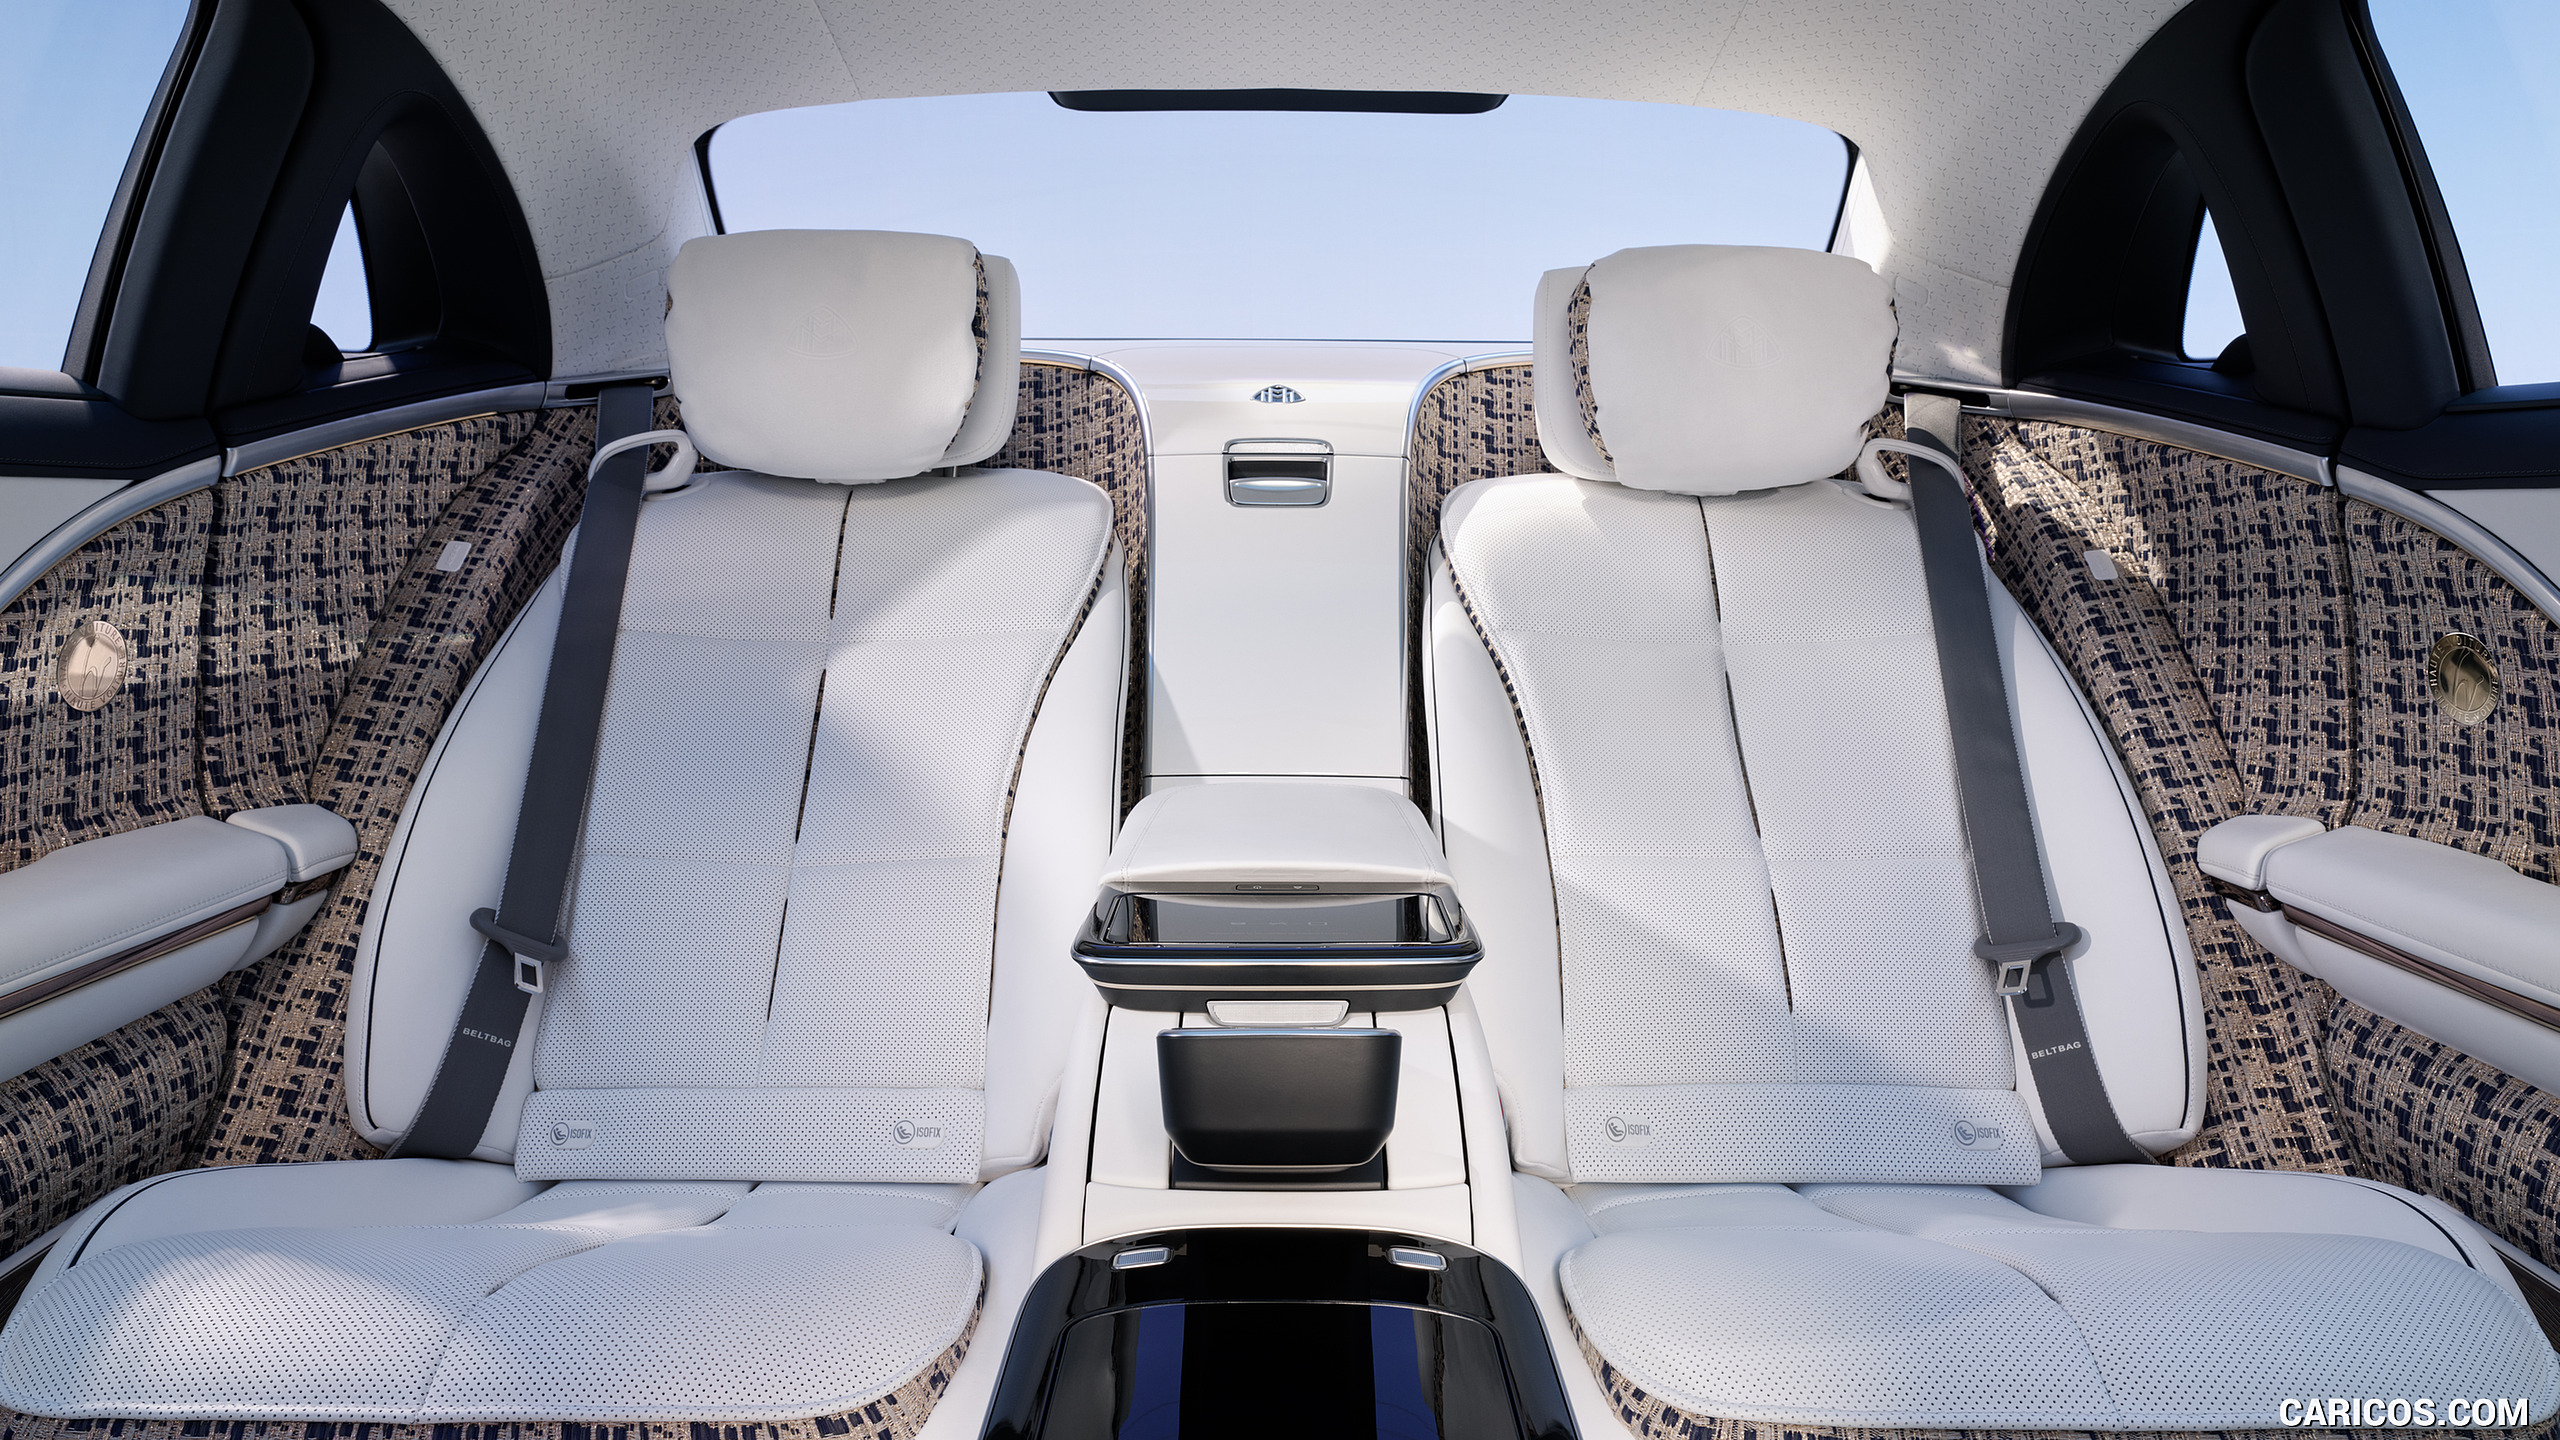 2023 Mercedes-Maybach S-Class Haute Voiture - Interior, Rear Seats, #21 of 29